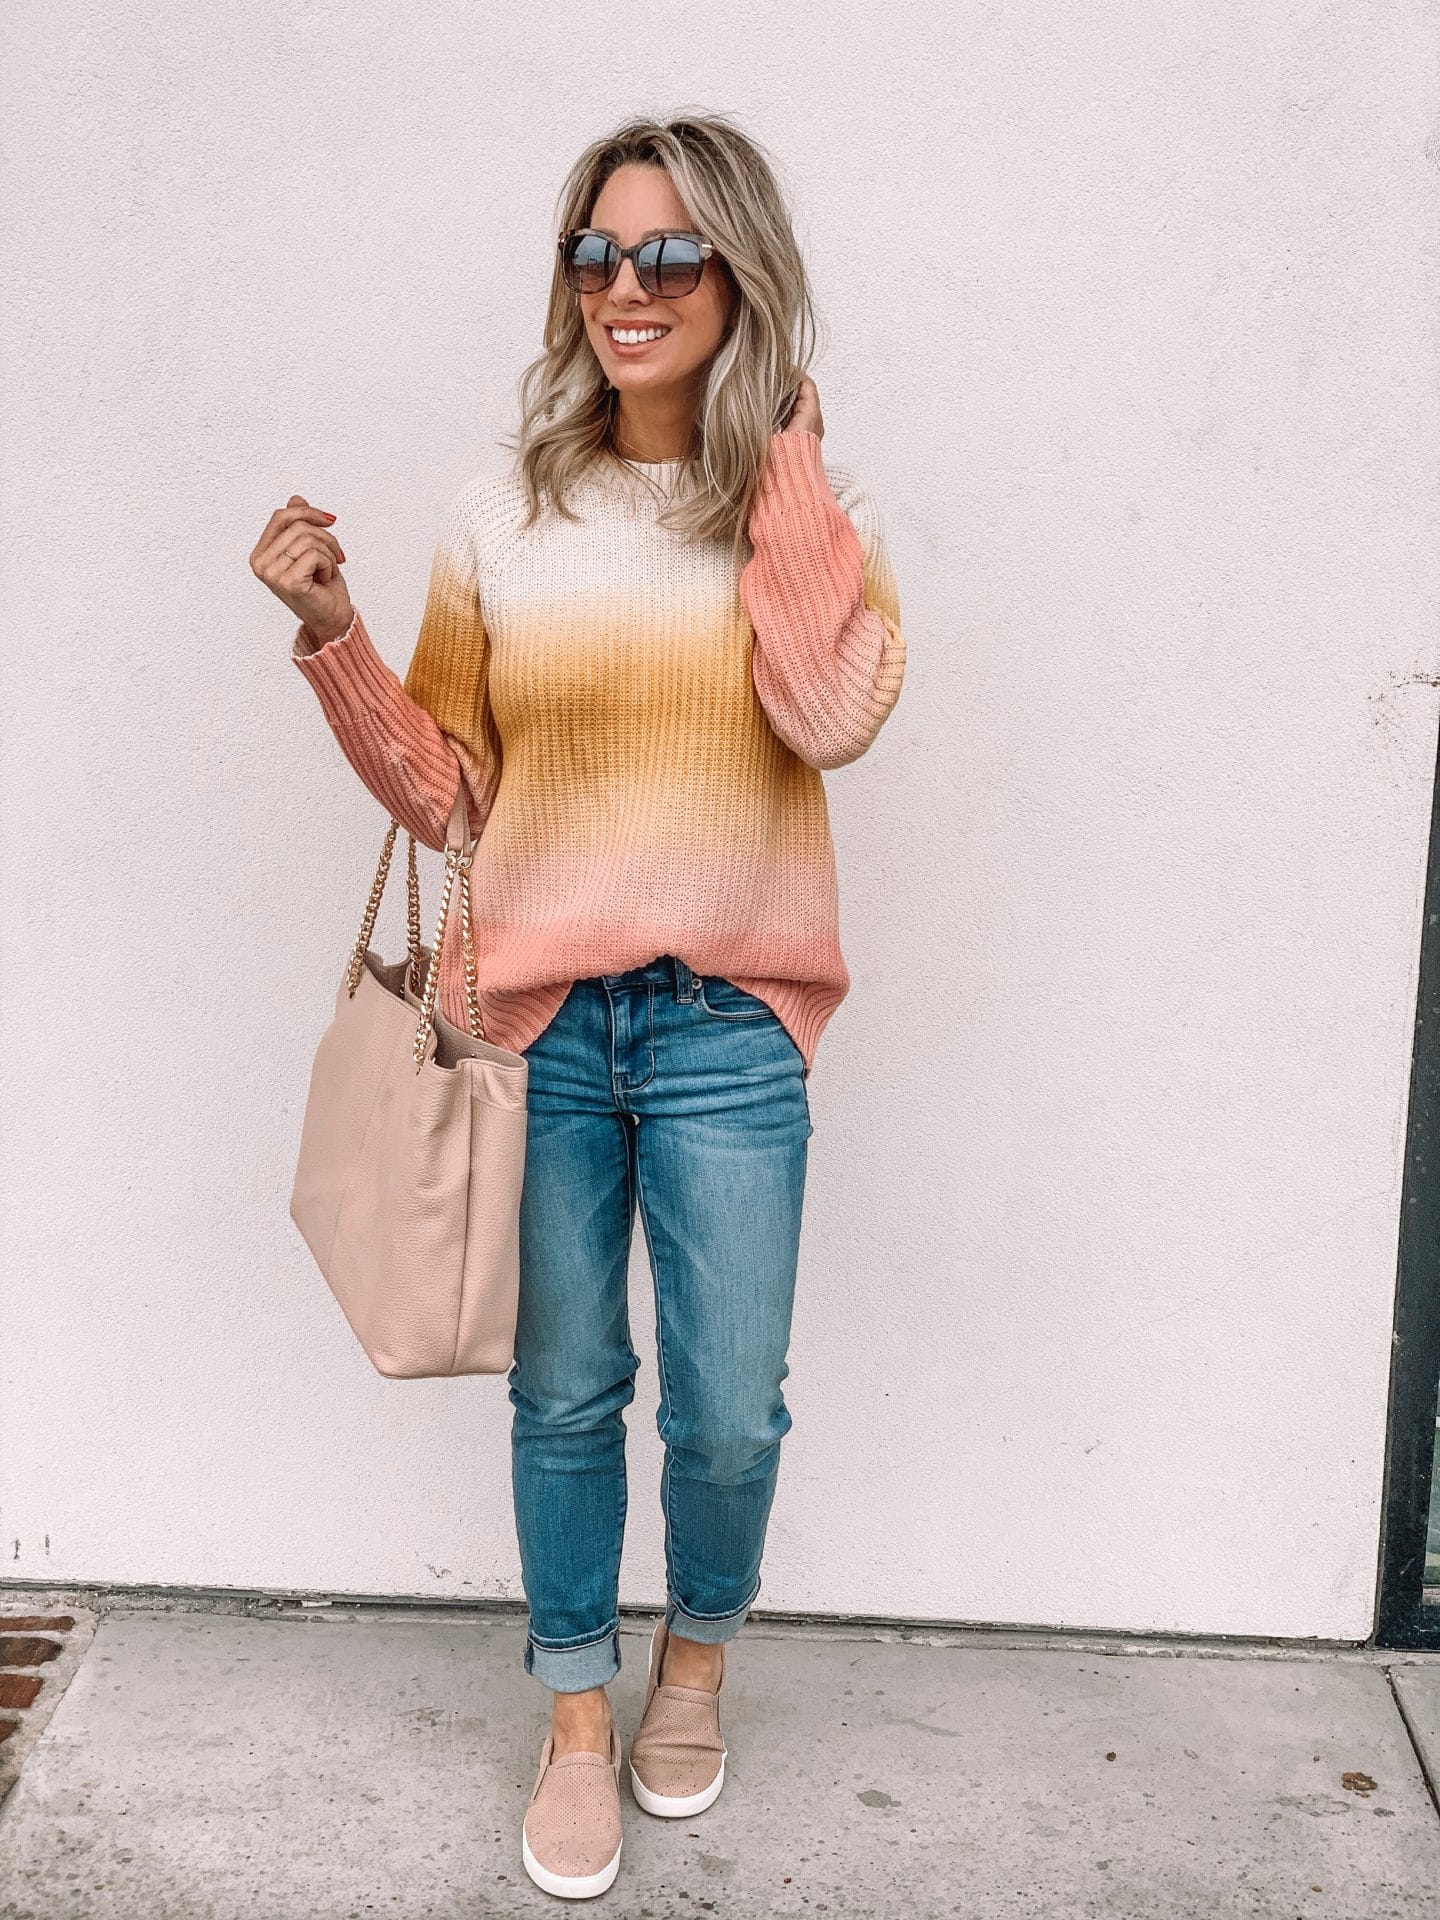 Jeans and striped sweater with pink slip on sneakers